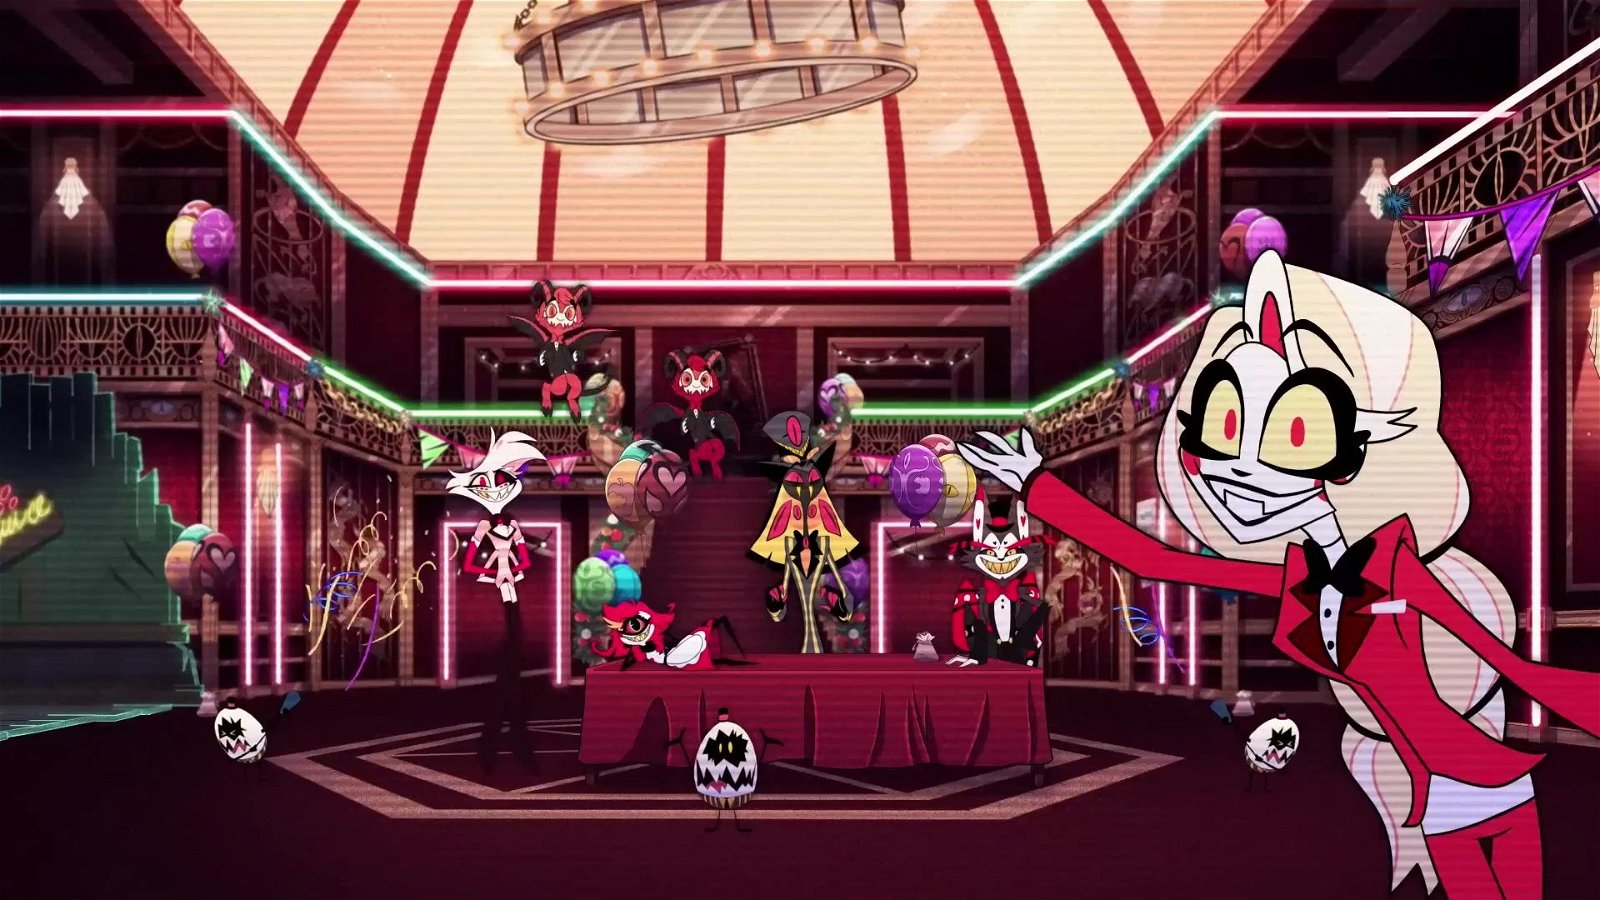 Hazbin Hotel Animated Series Cast on Exploring What It Means to Be Bad